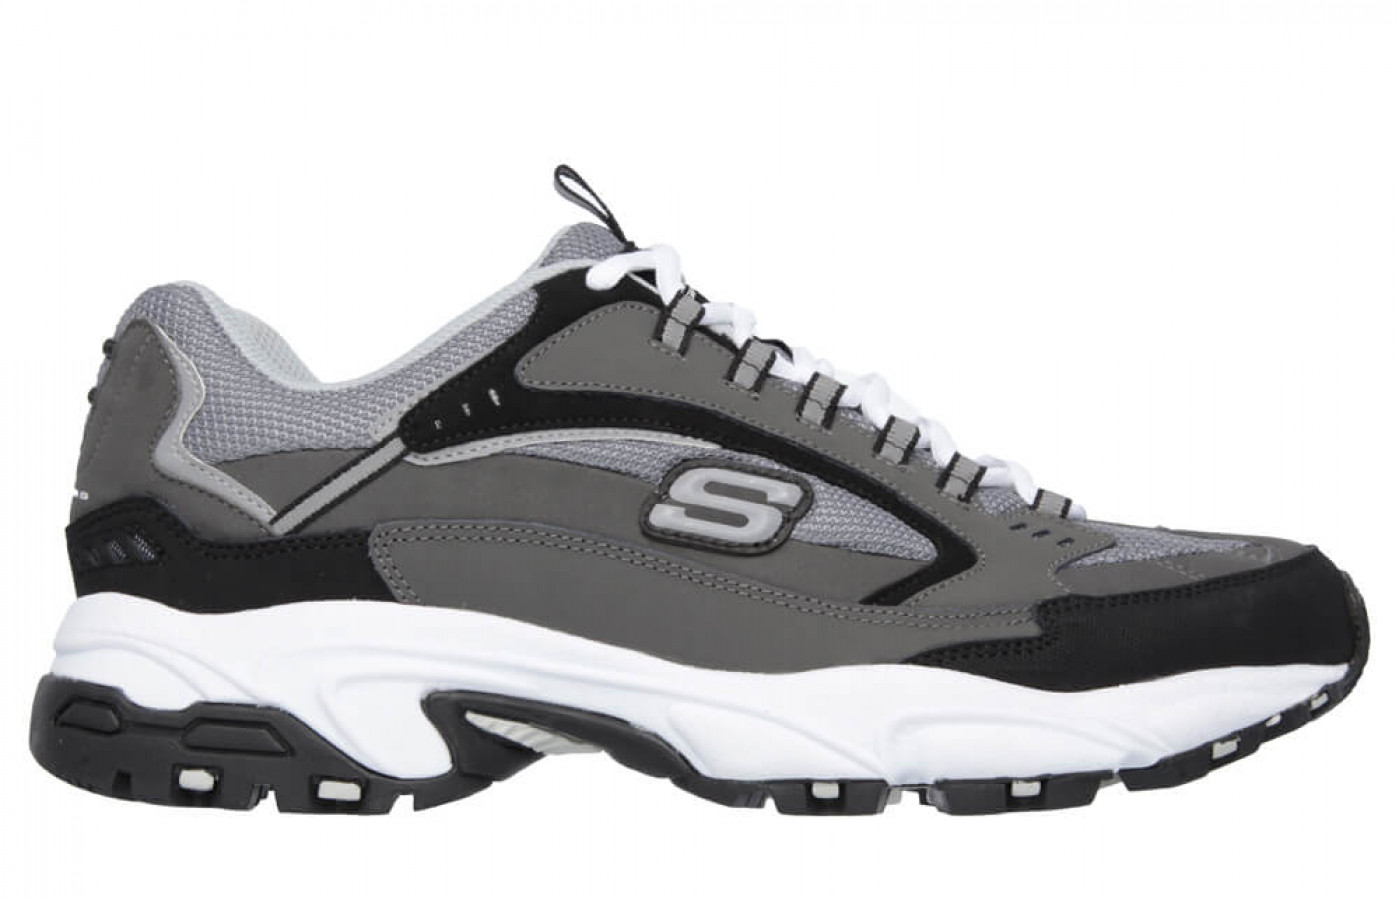 Skechers Stamina Cutback outer